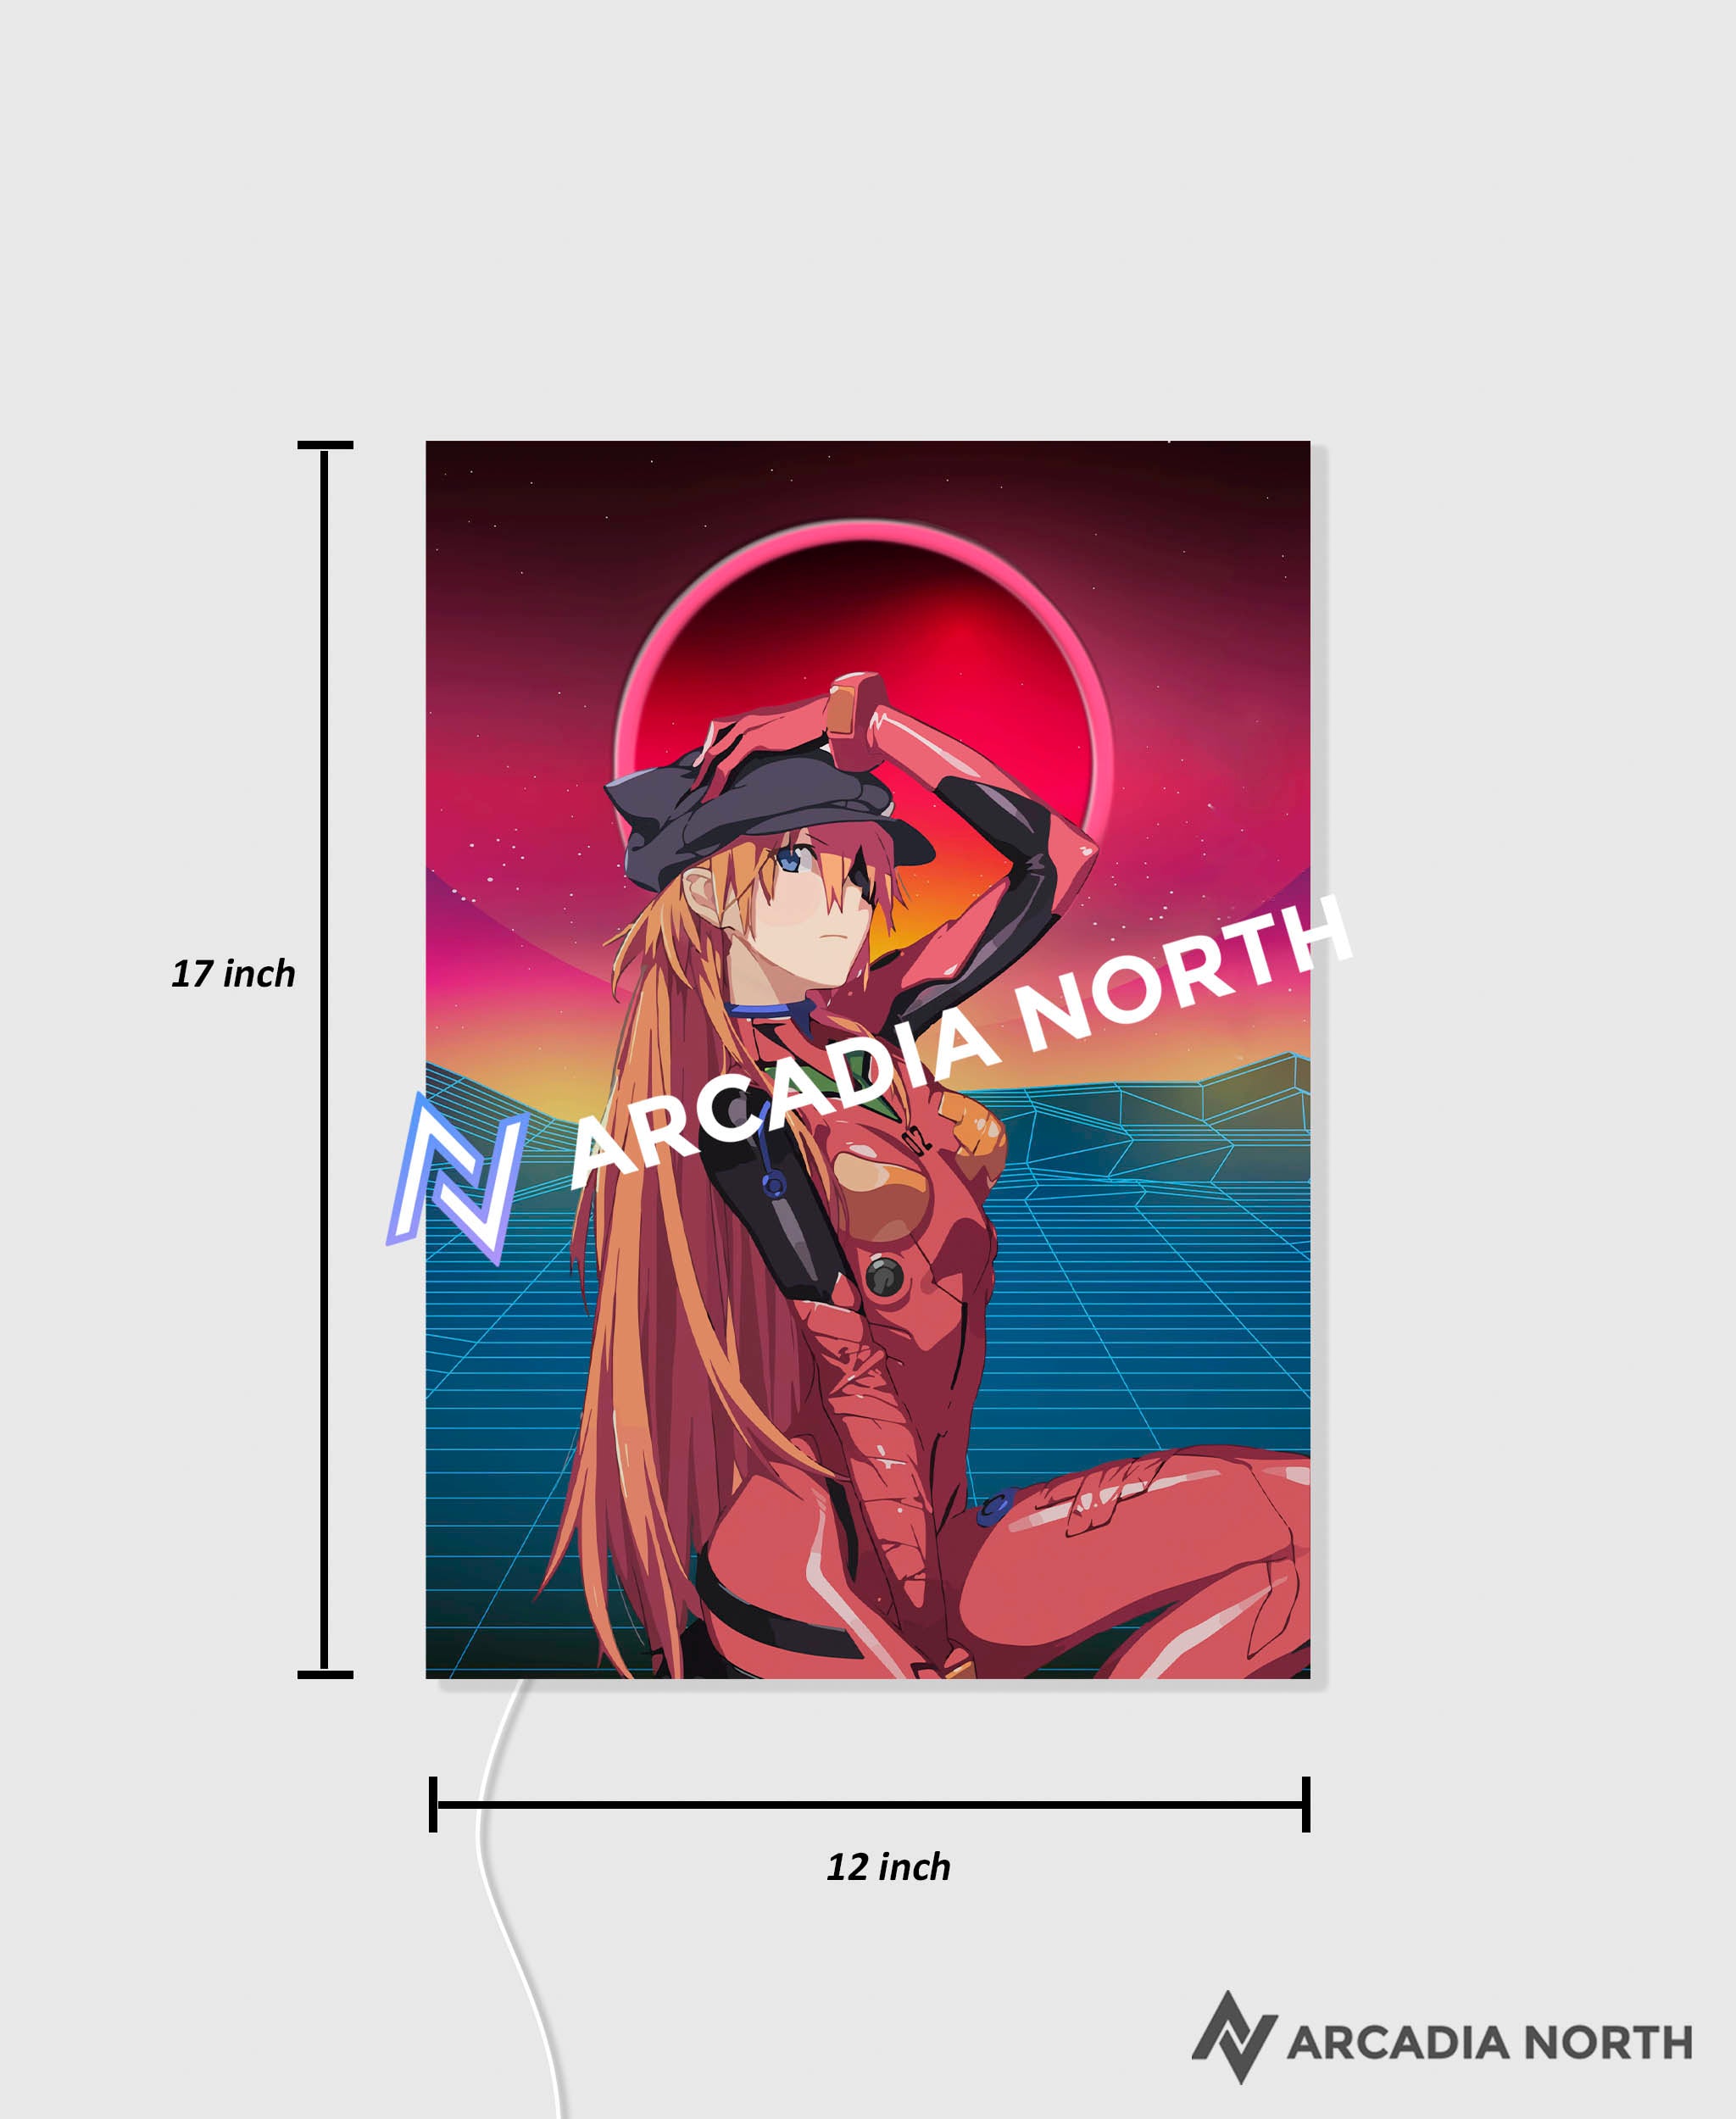 Arcadia North AURALIGHT Original LED Poster featuring the anime Neon Genesis Evangelion with Asuka Langley Soryu on a synthwave style backdrop. Illuminated by glowing neon LED lights. UV-printed on acrylic.